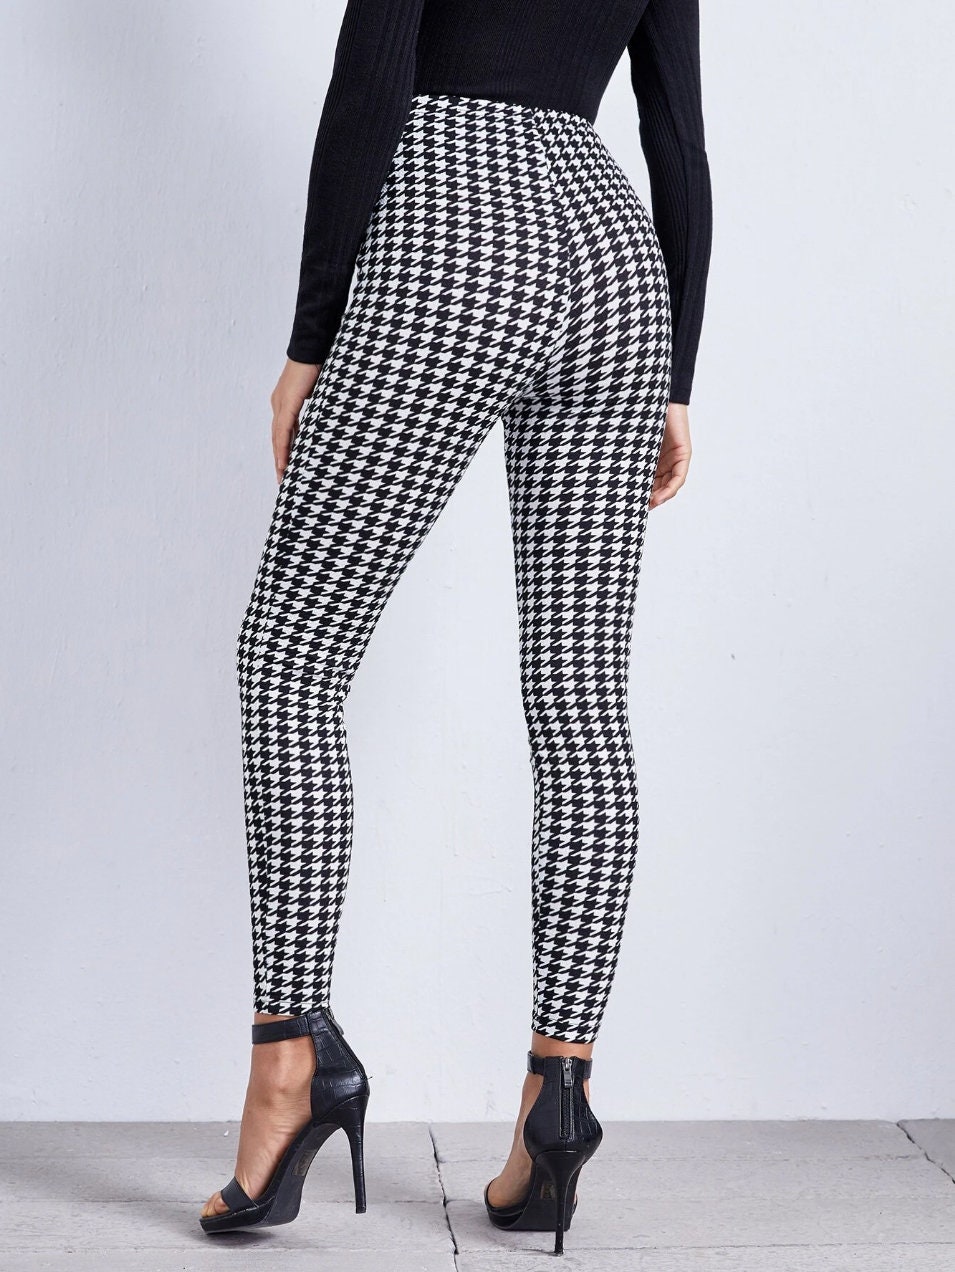 Black and White High Waist Houndstooth Print Leggings Casual Slight Stretch Fit